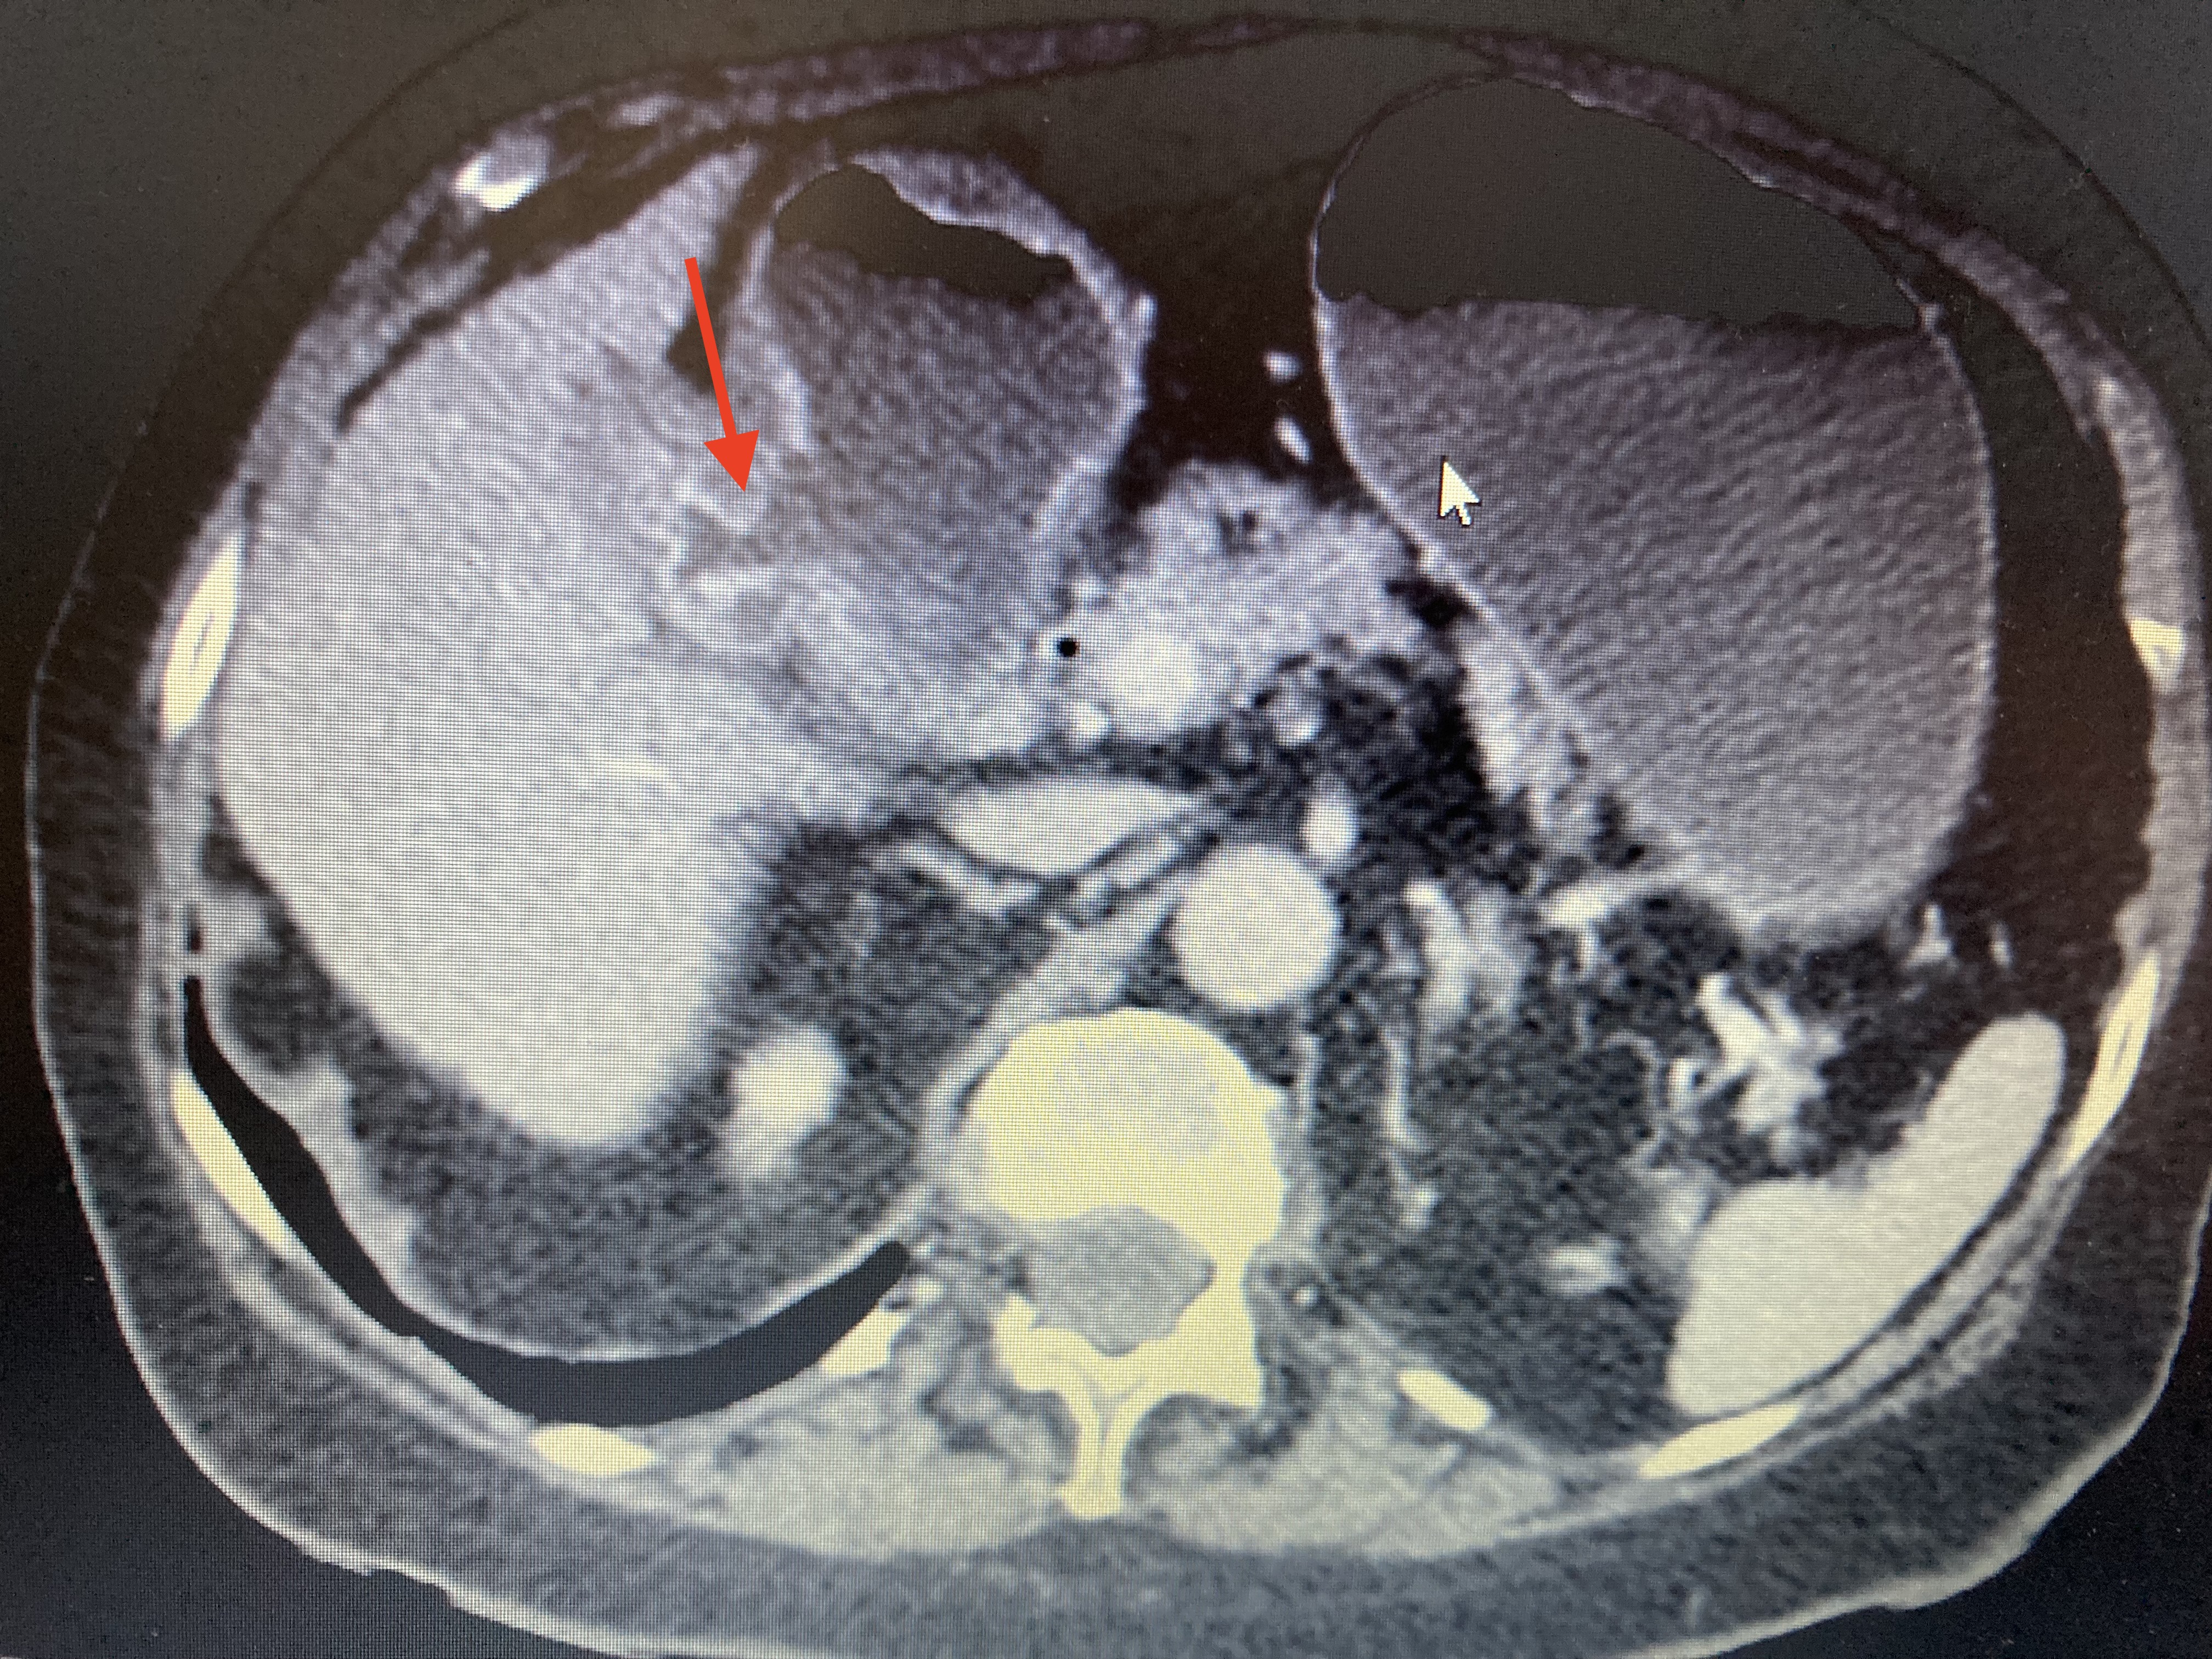 Computed tomography of the abdomen for a patient with Bouveret syndrome, showing a cholecystoduodenal fistula (shown by arrow)